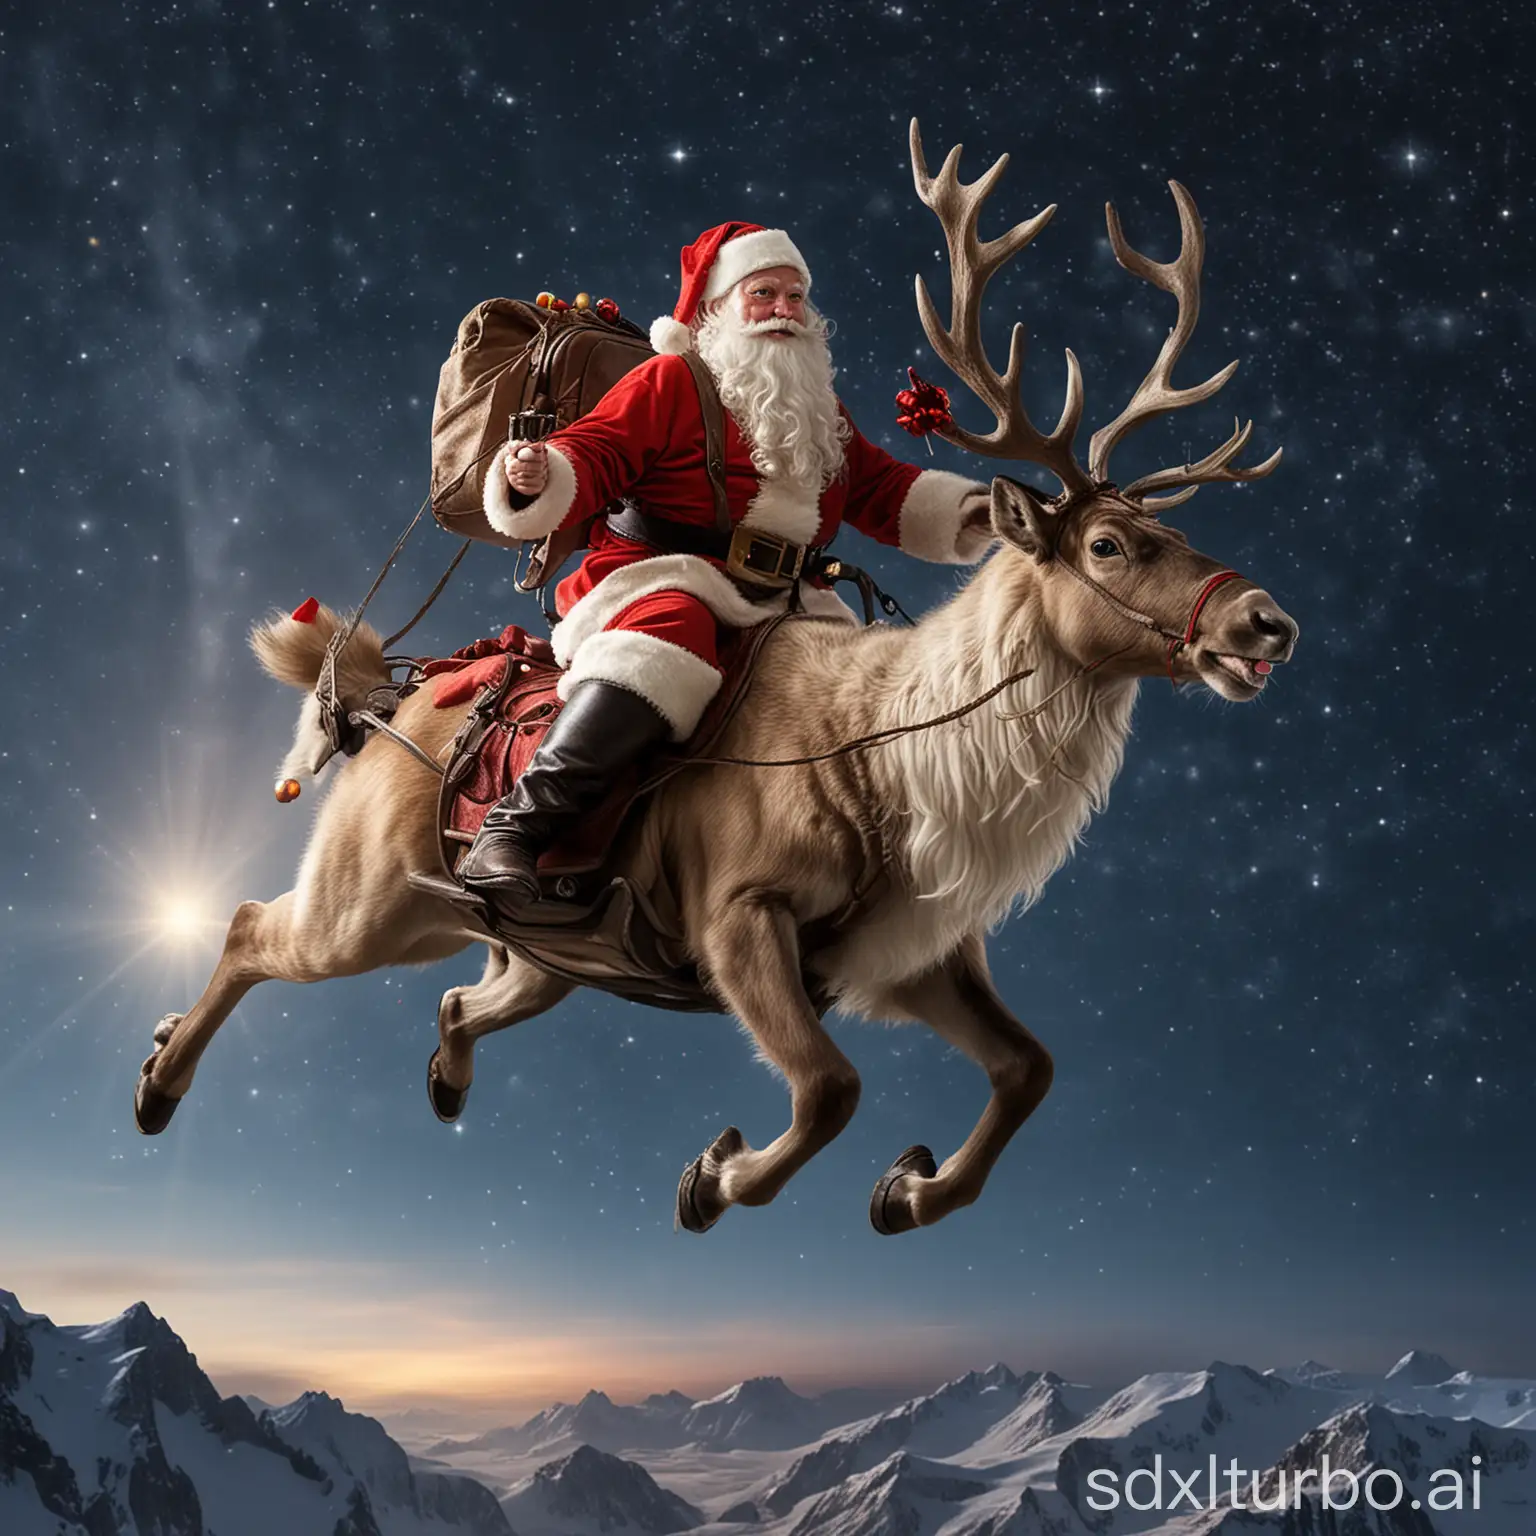 Santa, how he rides on a shining flight reindeer, which takes him up to the night sky, where stars are his only companions.